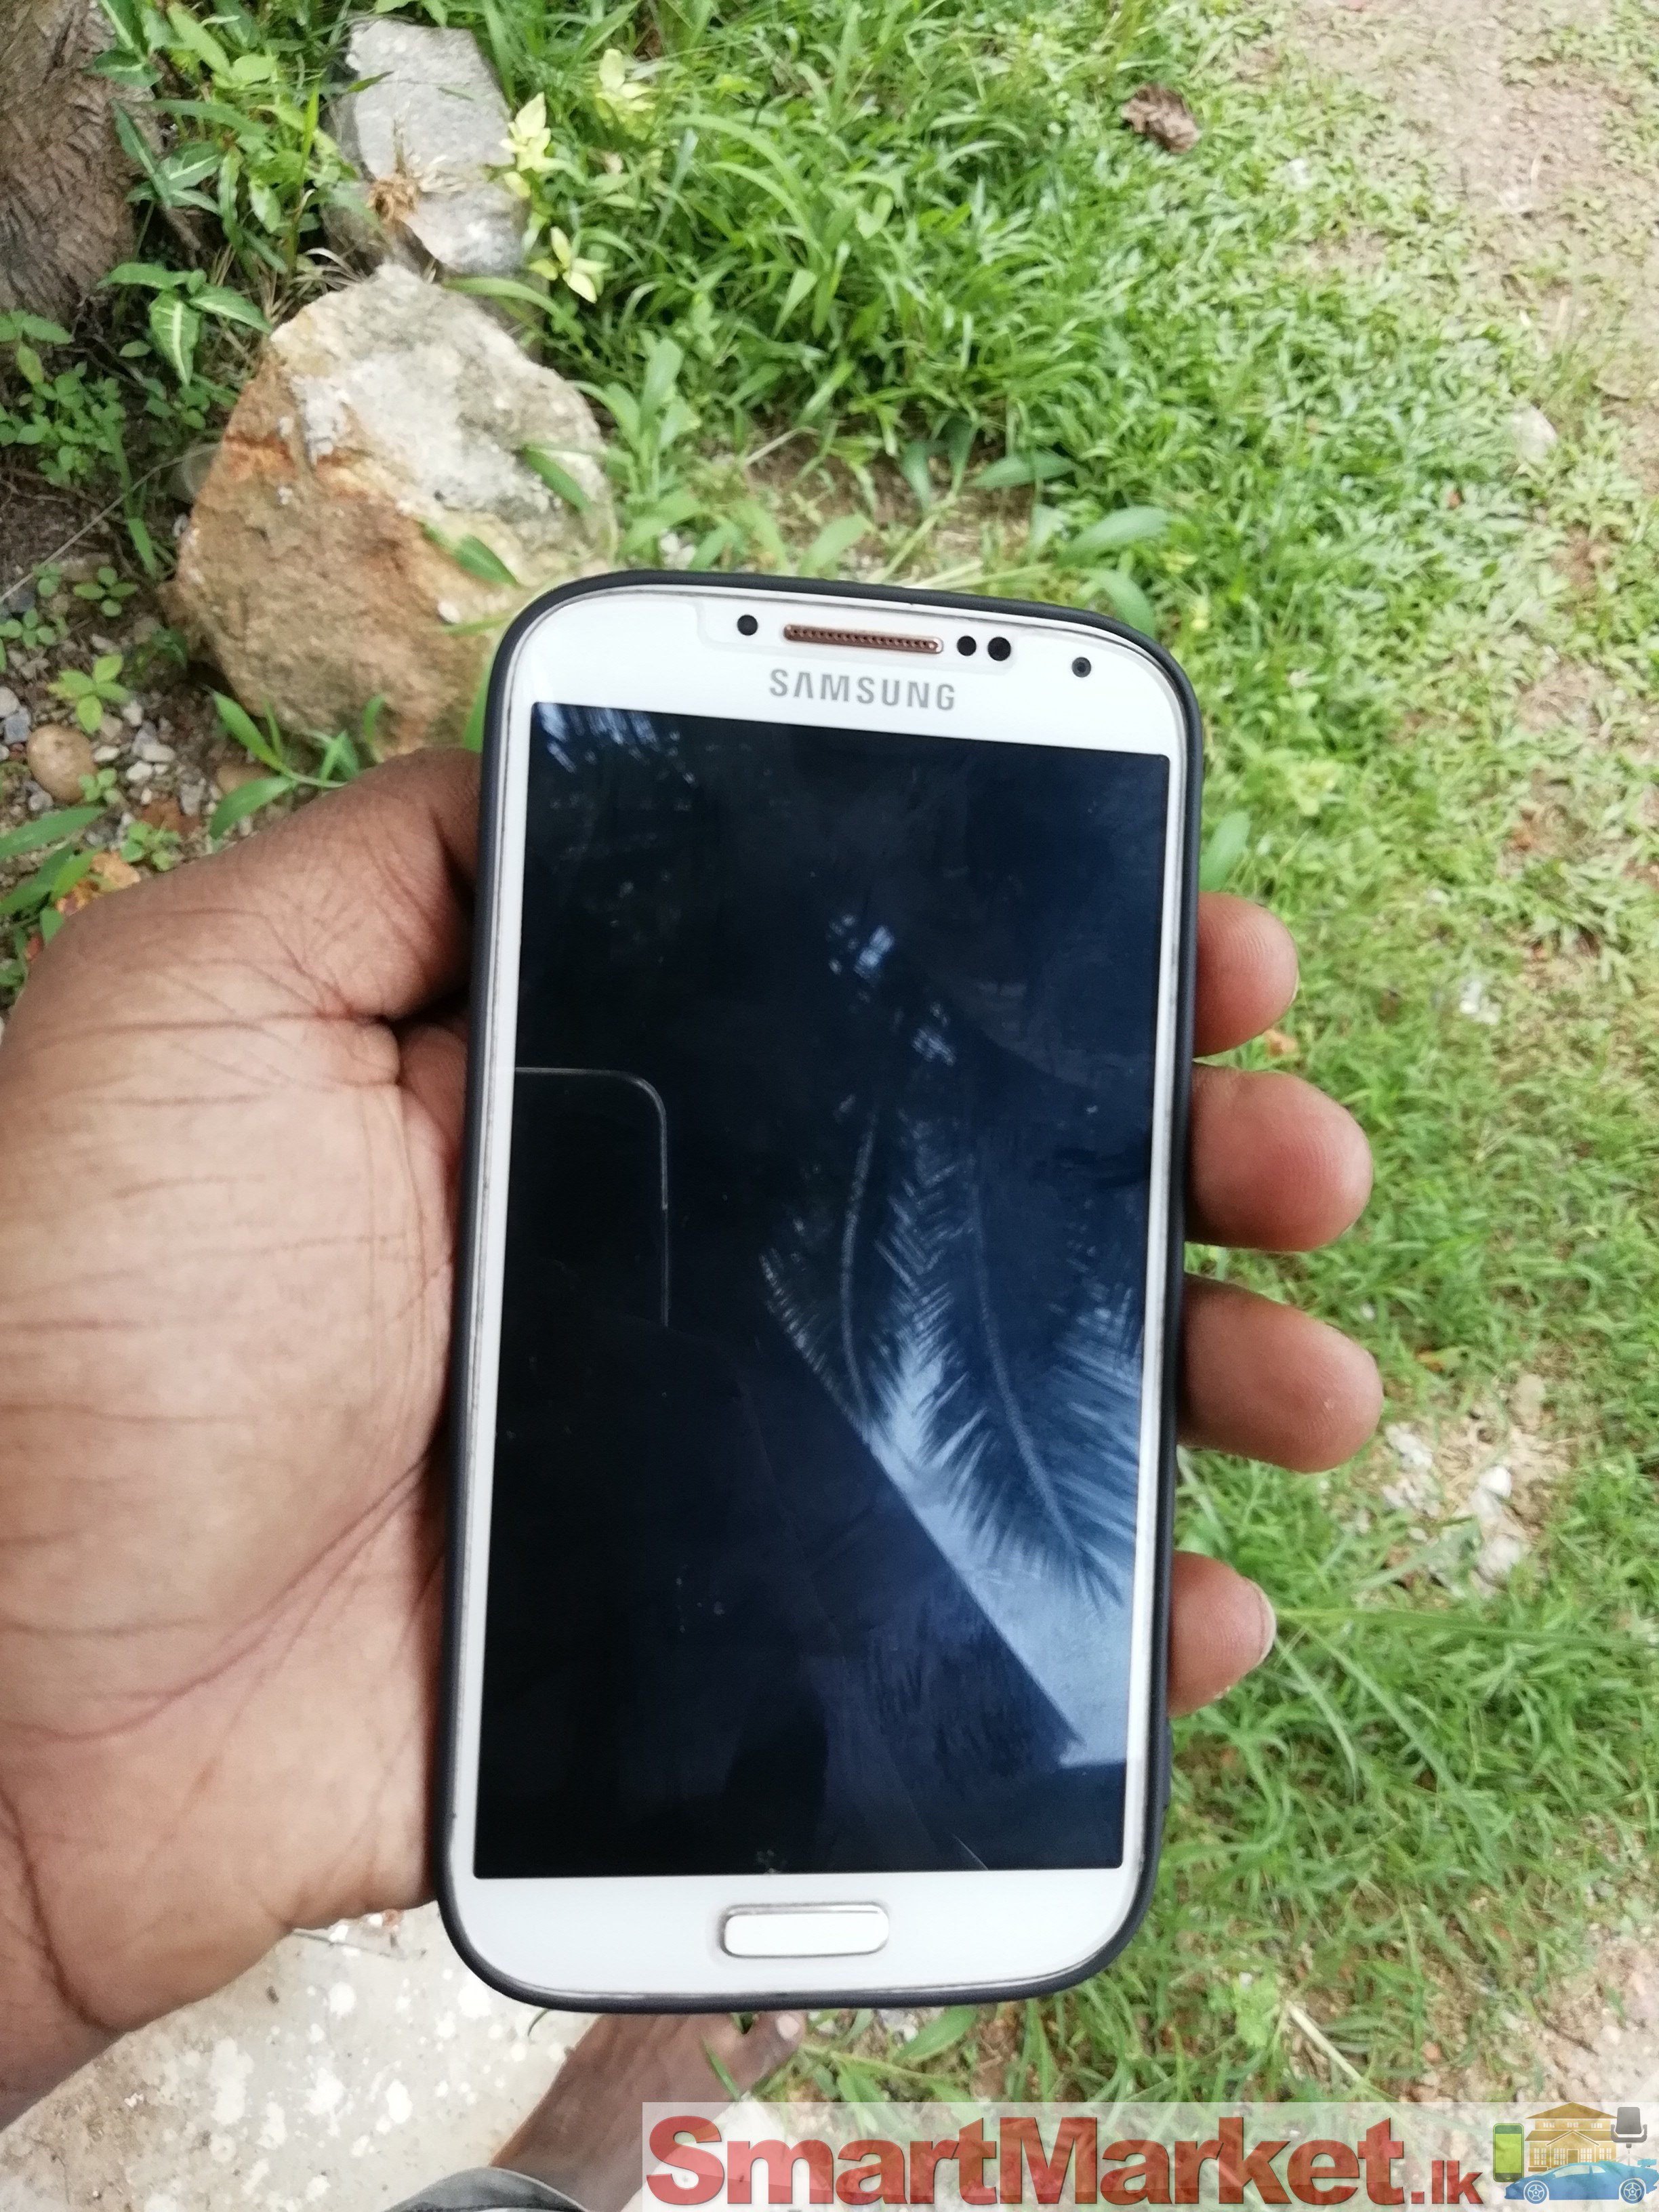 Galaxy S4 For Sale